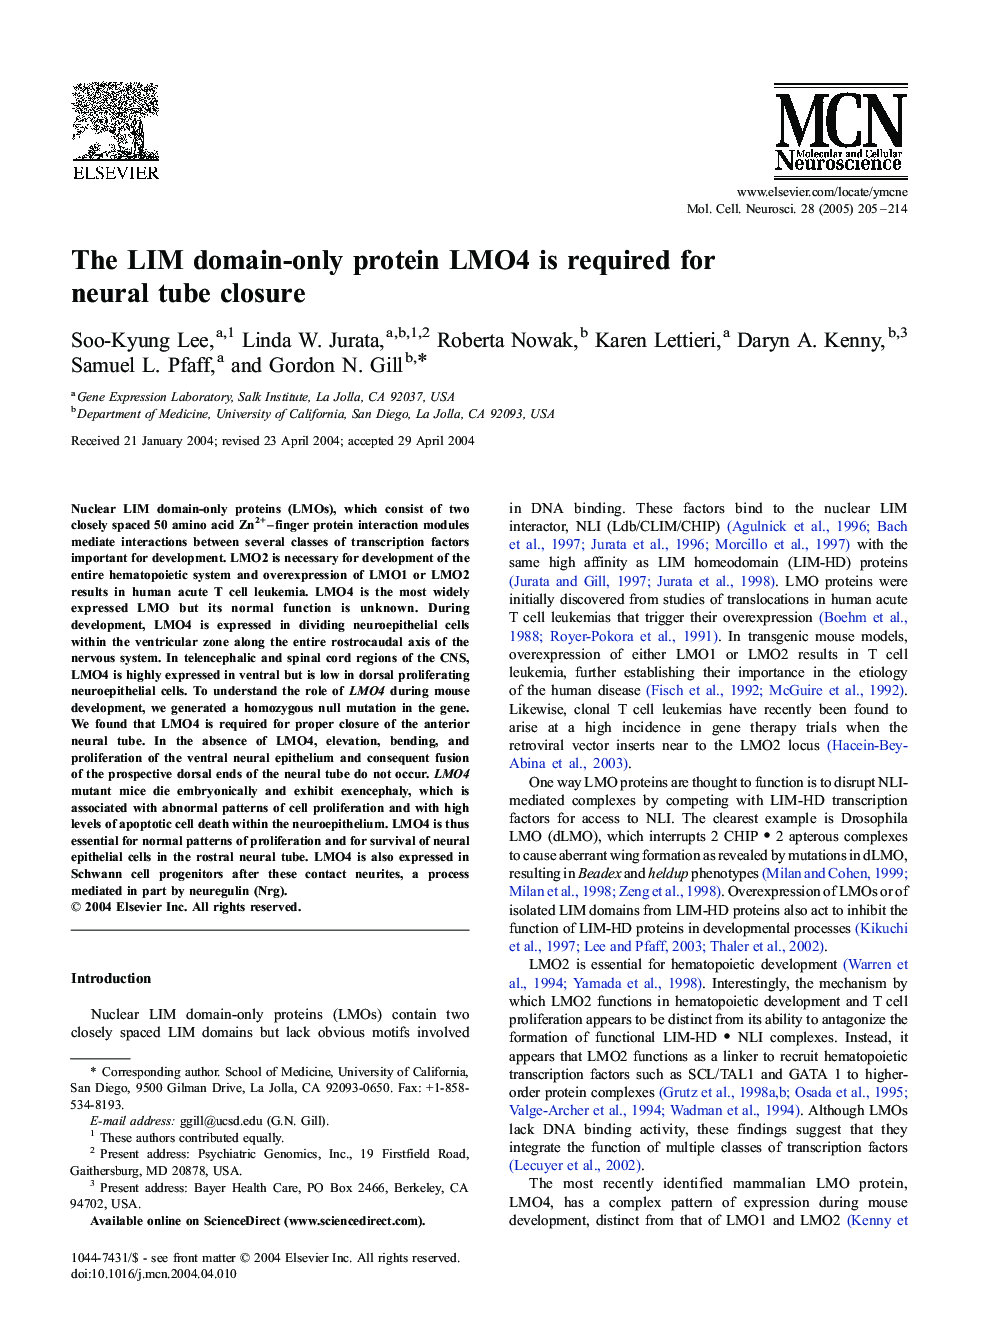 The LIM domain-only protein LMO4 is required for neural tube closure